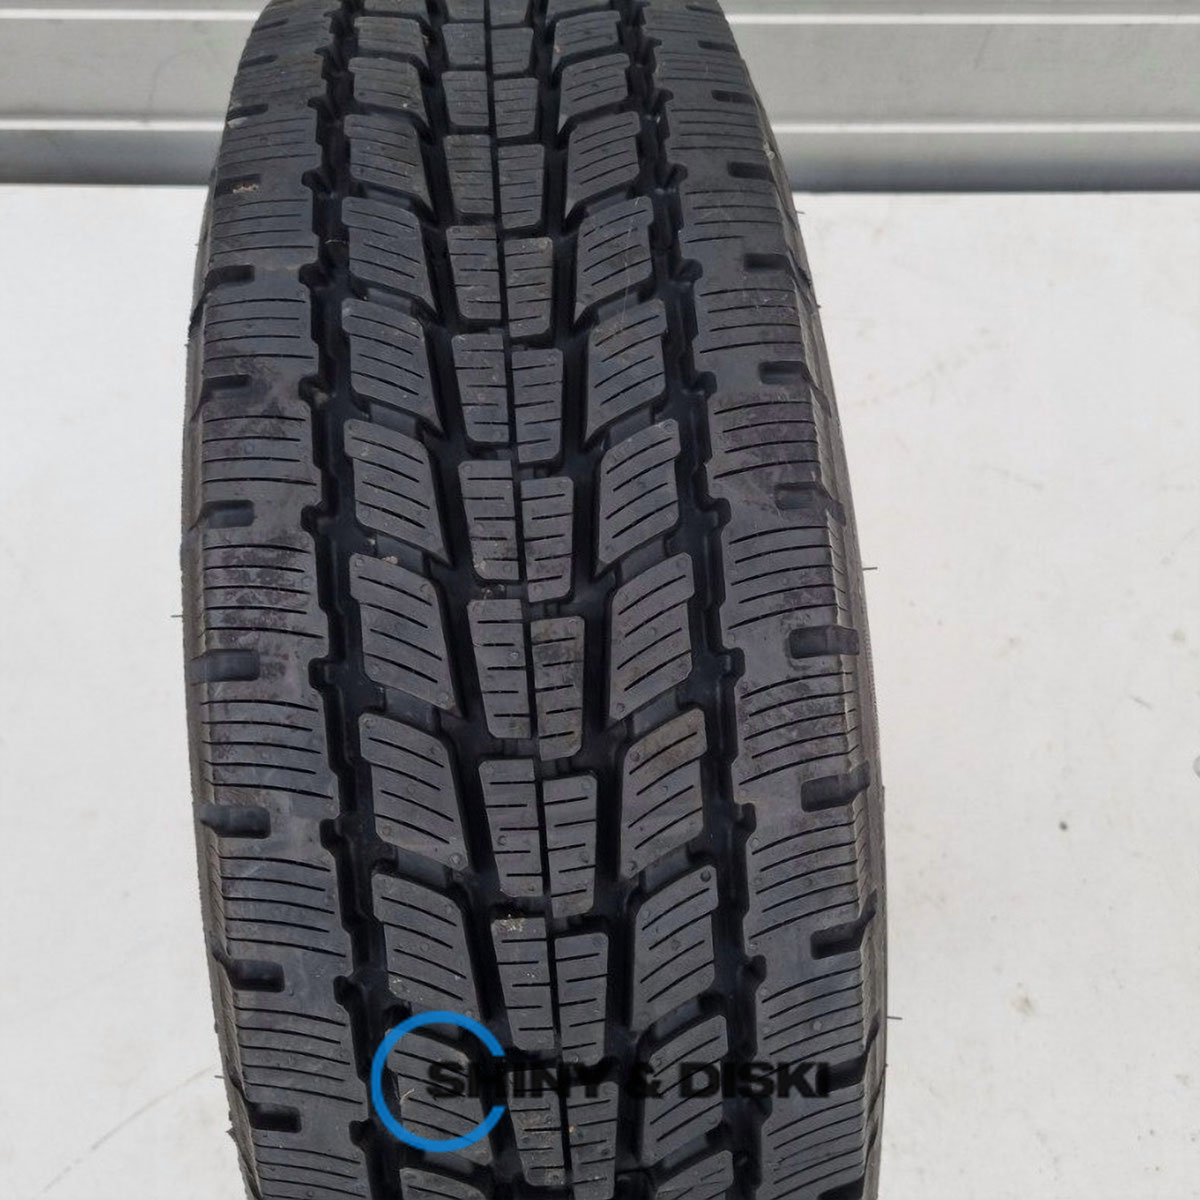 покрышки starmaxx prowin st950 all weather 215/65 r16c 109/107r